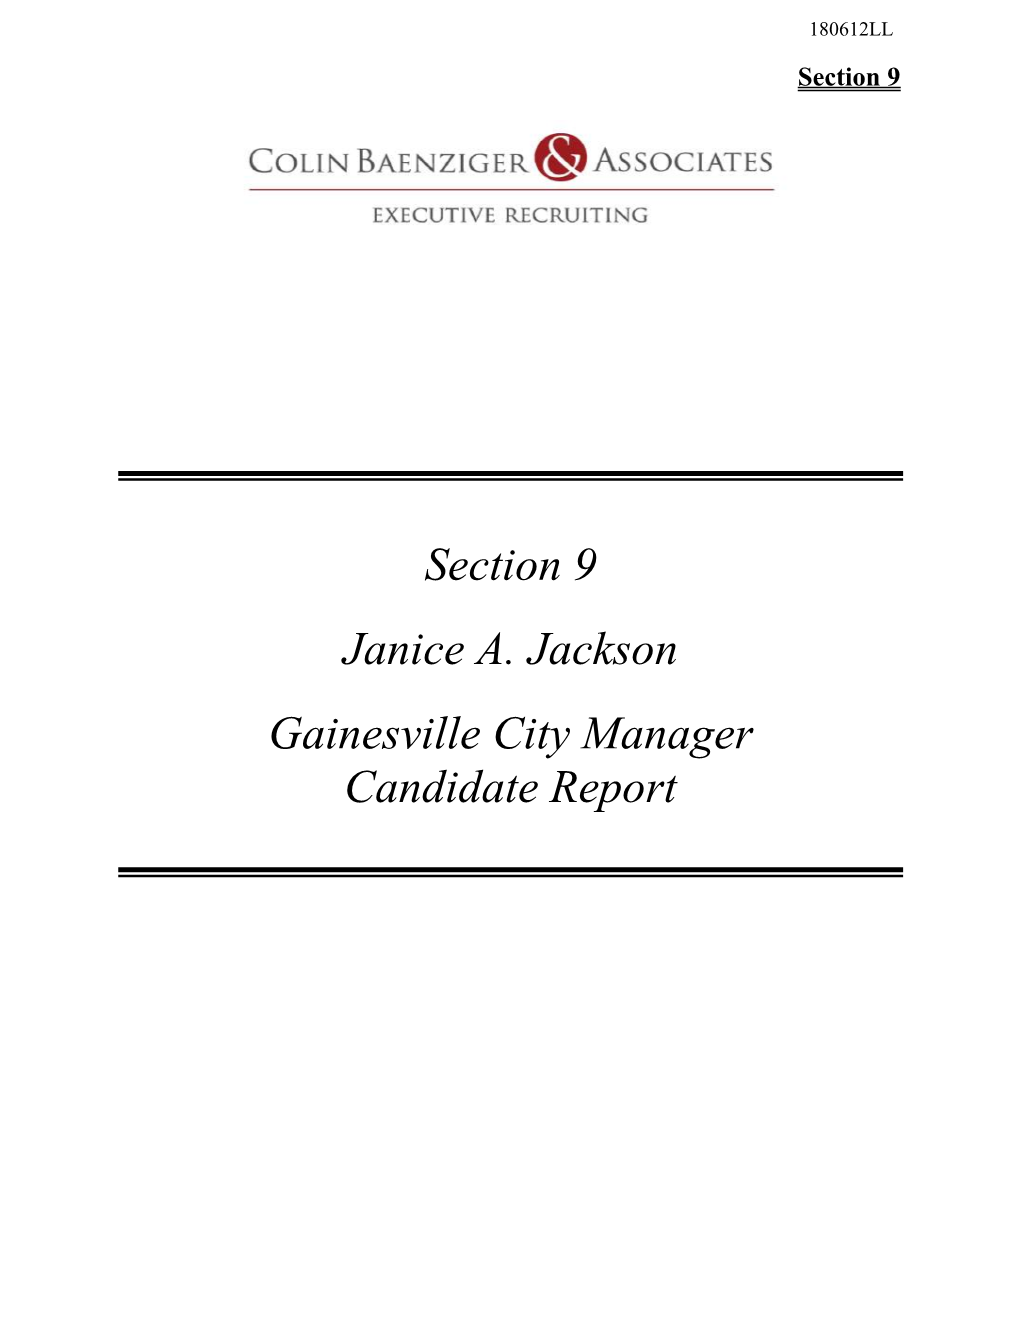 Section 9 Janice A. Jackson Gainesville City Manager Candidate Report Section 9